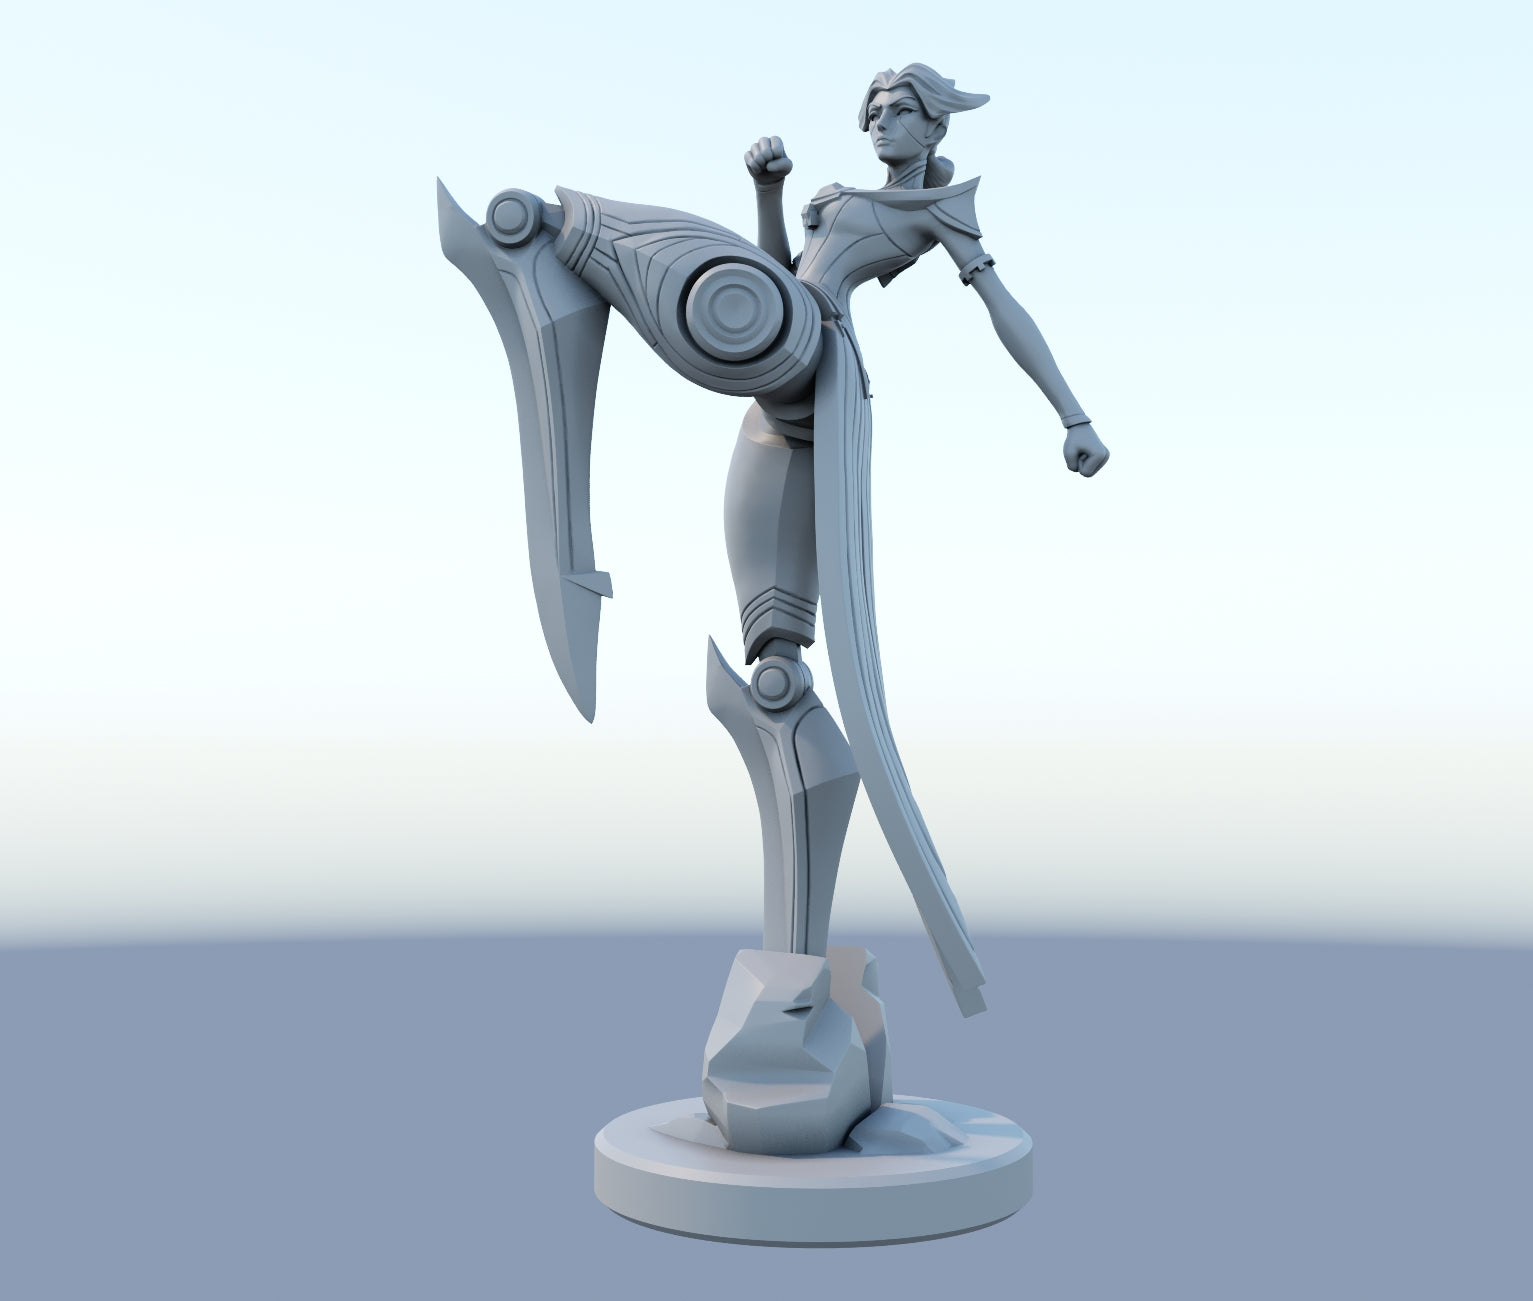 Camille 3D-printed League of Legends champion figure. Decorate your gaming setup or home with your favorite League of Legends champion! Choose between the unpainted version, perfect for you to paint yourself, or the hand-painted version by a professional painter. Order your figure today!